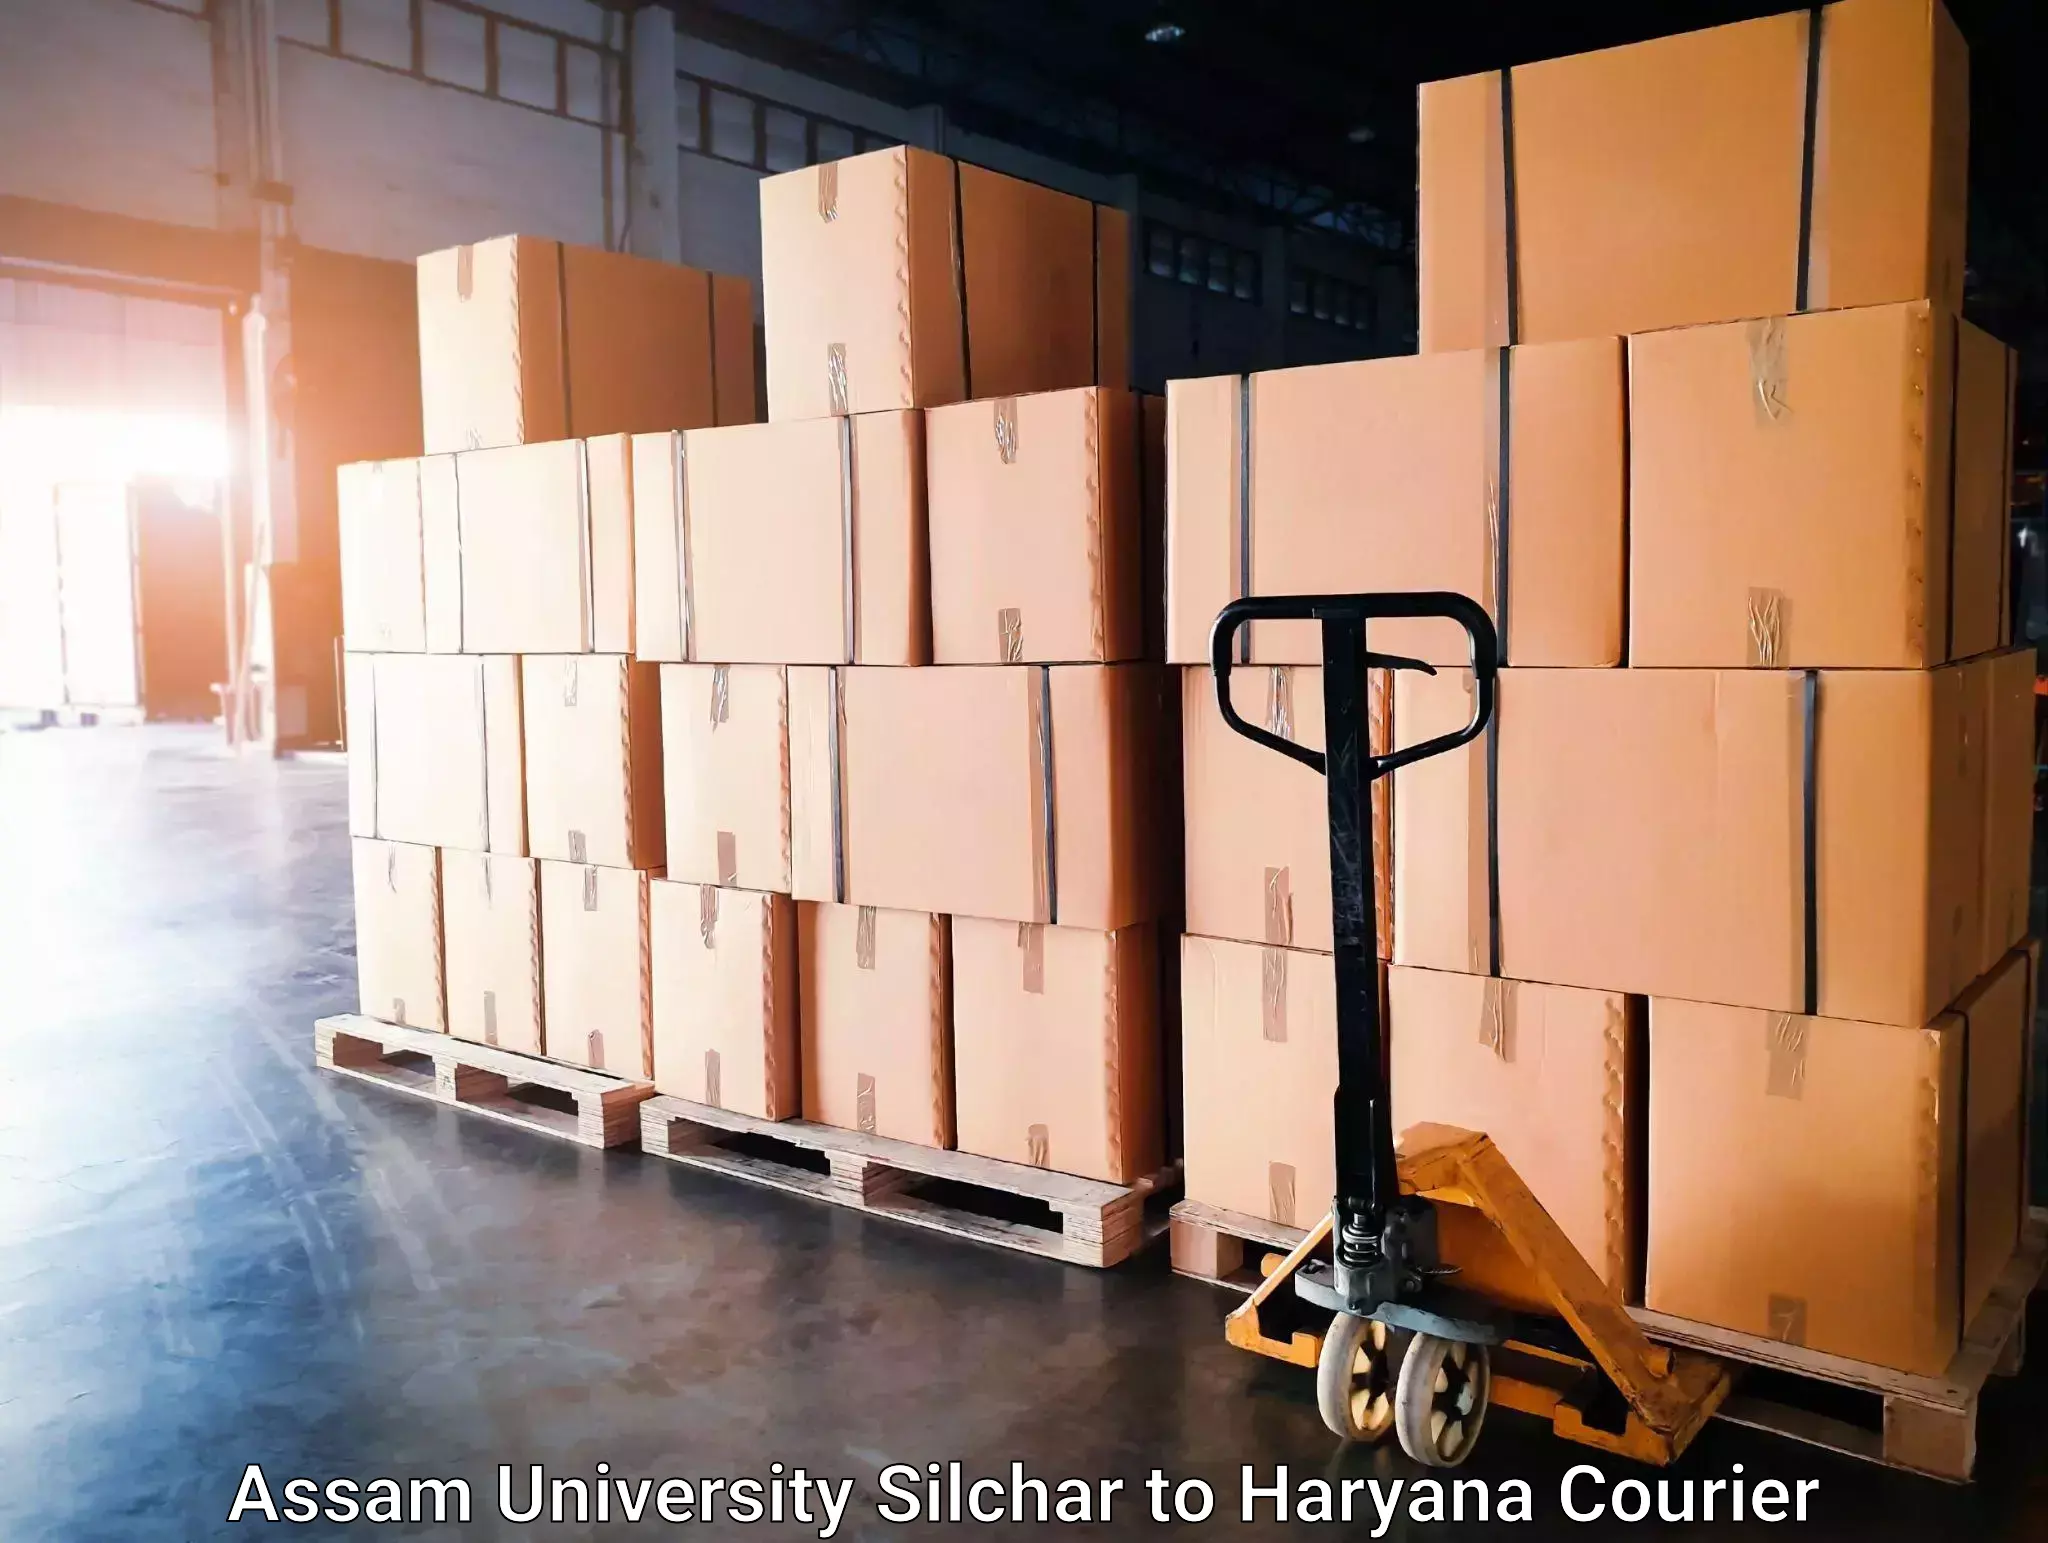 Flexible delivery scheduling Assam University Silchar to NCR Haryana